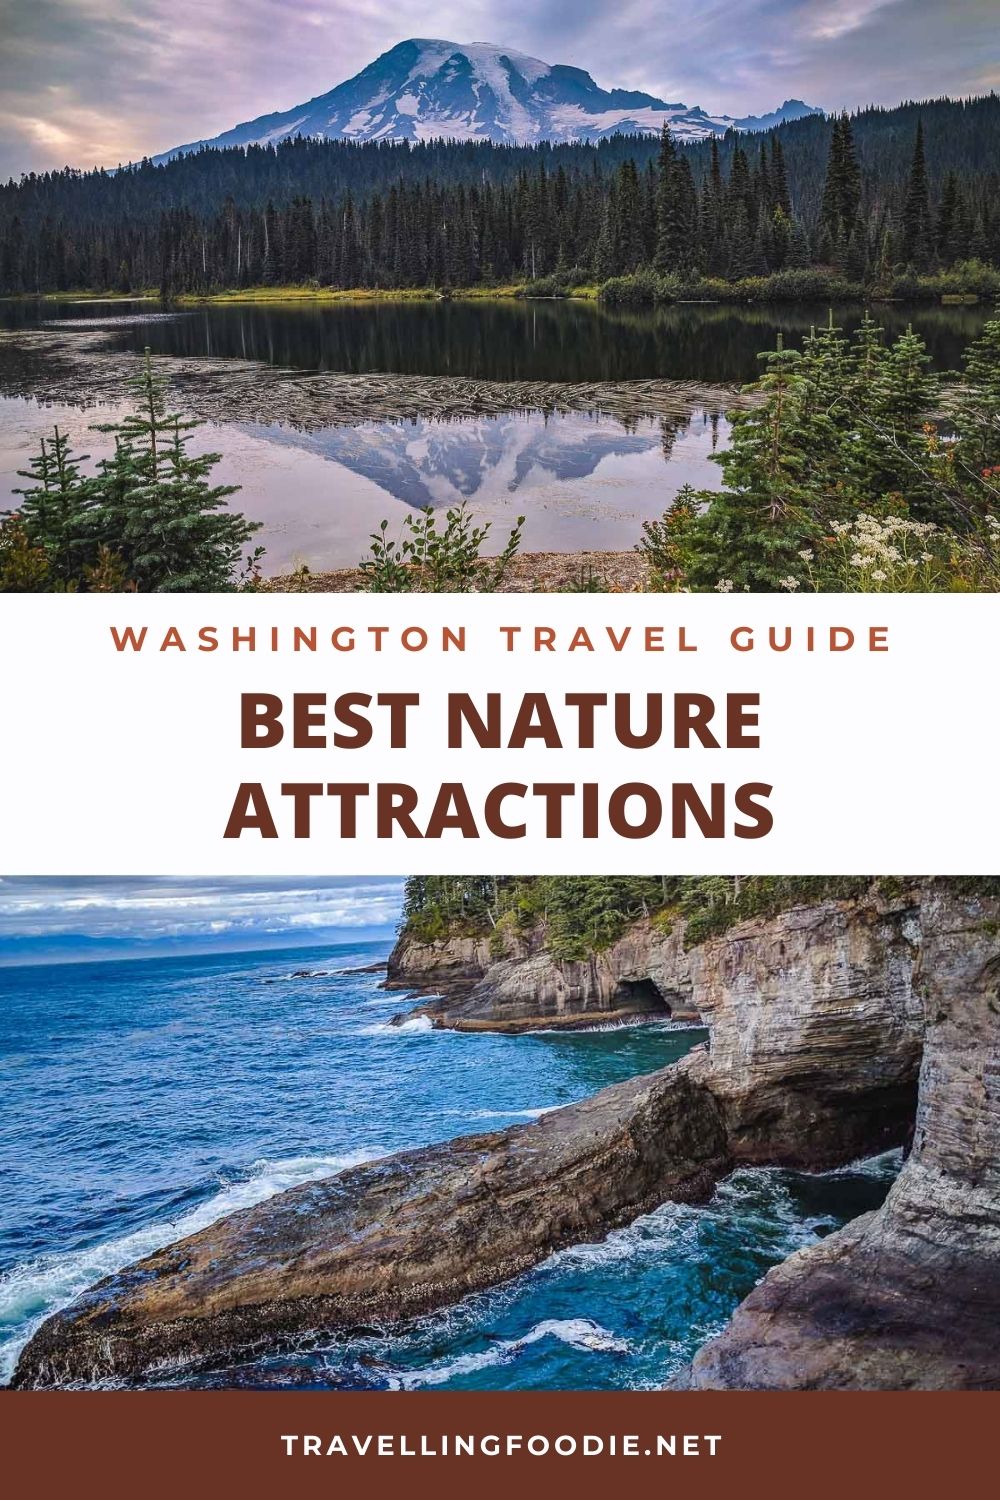 Best Washington Nature Attractions - Travel Guide on TravellingFoodie.net